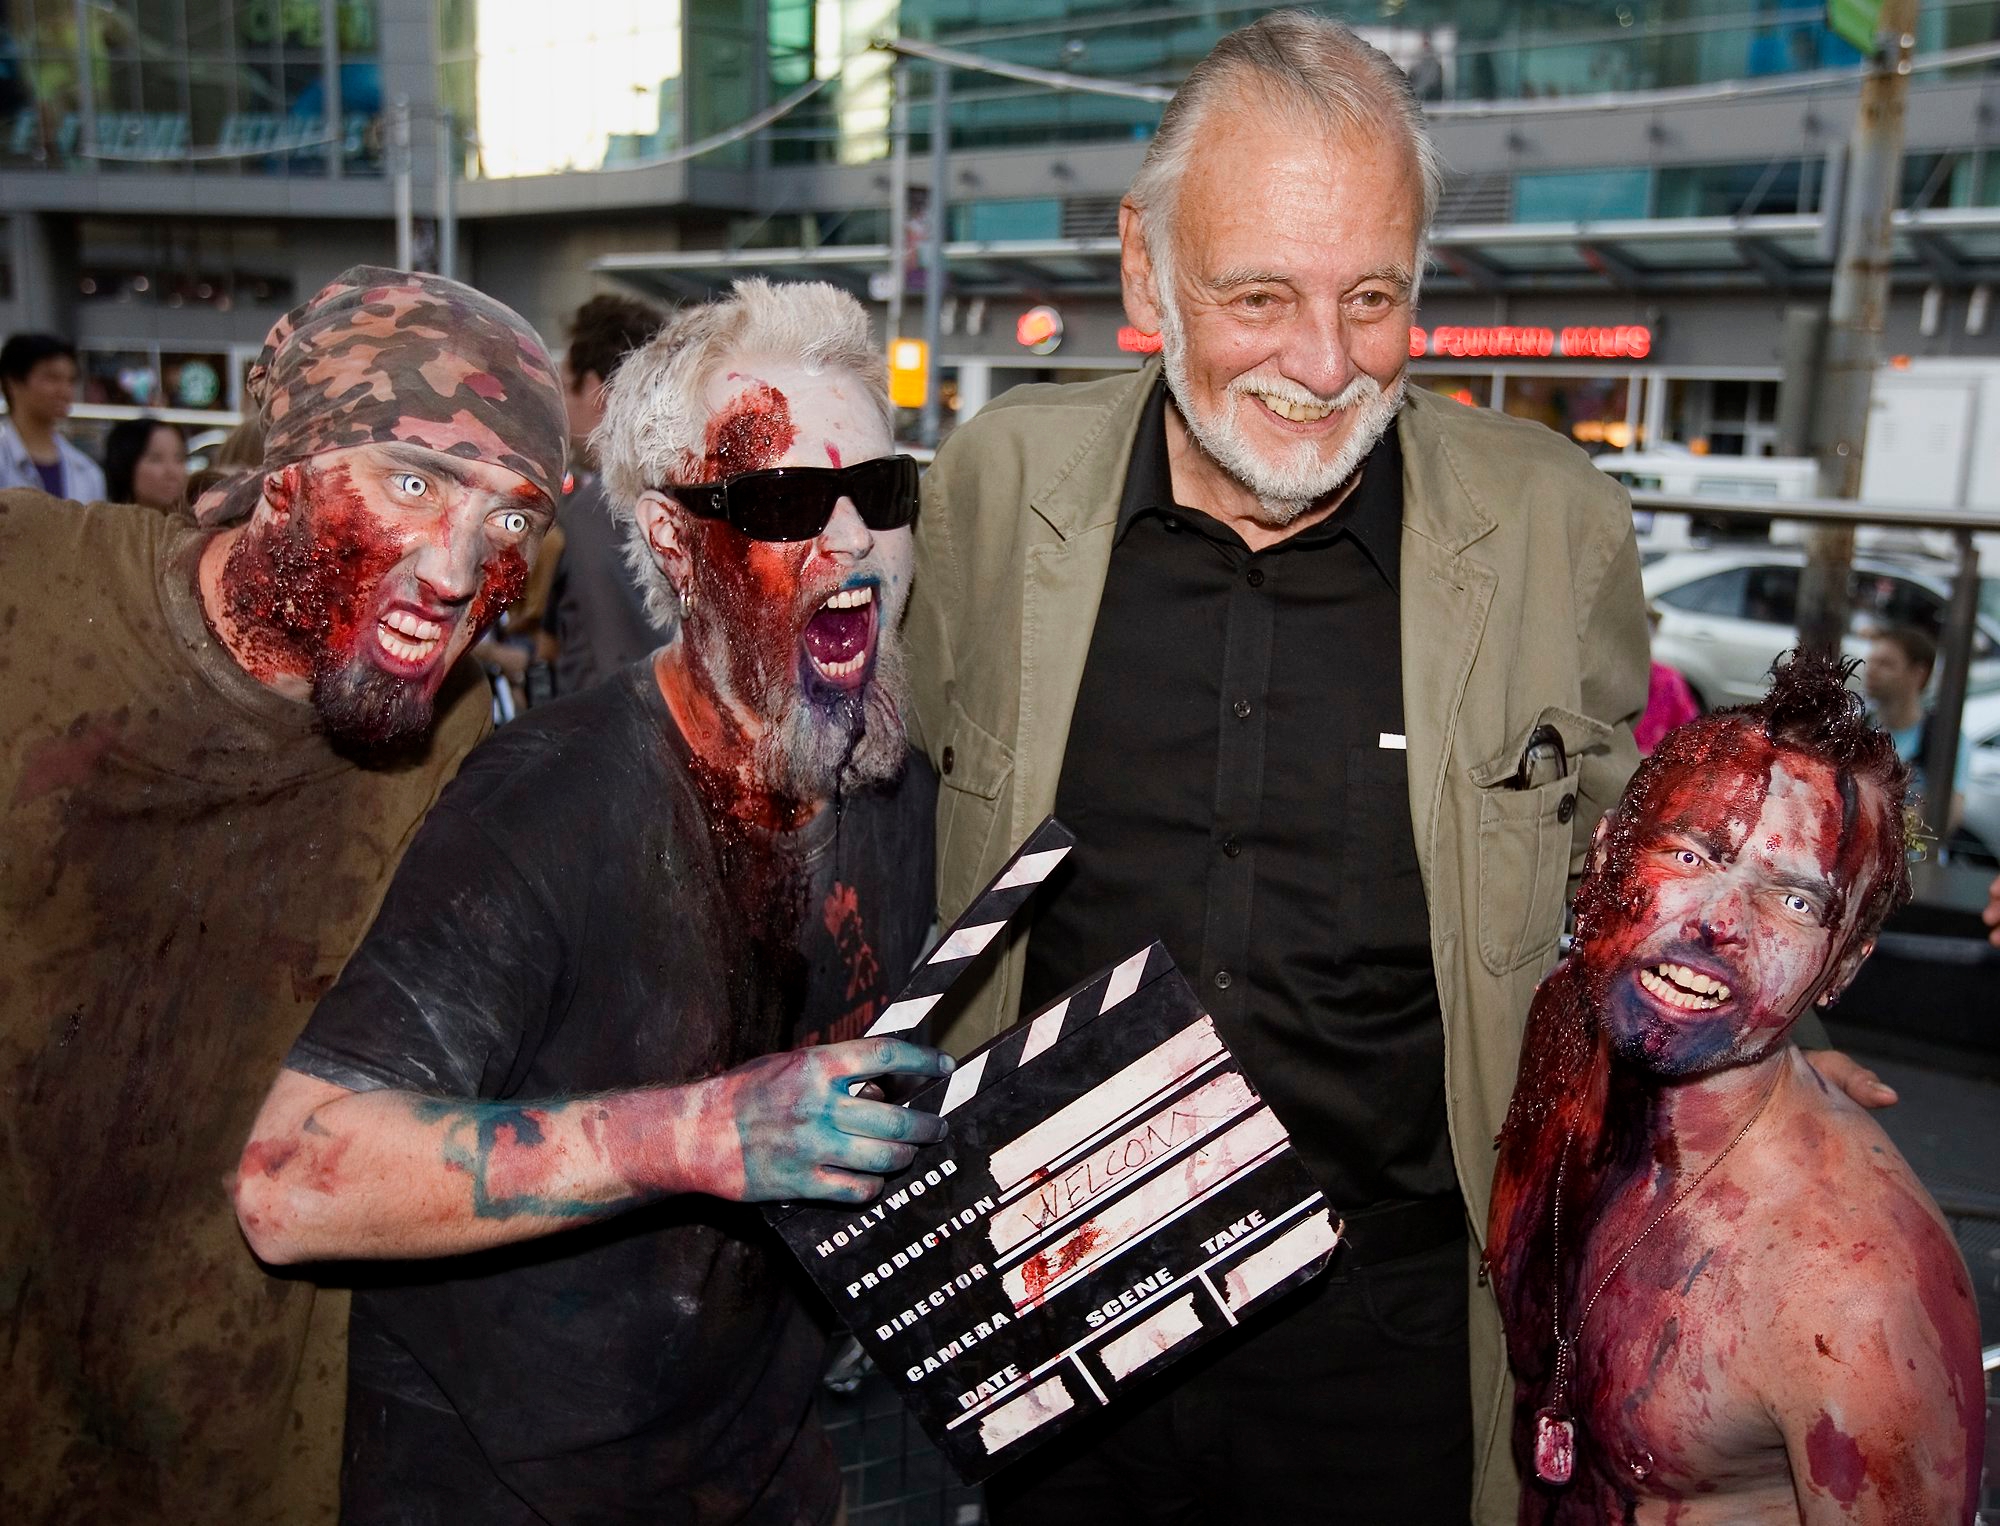 FILE - In this Sept. 12, 2009, file photo, director George Romero poses with some fans dressed as zombies after accepting a special award during the Toronto International Film Festival in Toronto. Romero, whose classic "Night of the Living Dead" and other horror films turned zombie movies into social commentaries and who saw his flesh-devouring undead spawn countless imitators, remakes and homages, has died. He was 77. Romero died Sunday, July 16, 2017, following a battle with lung cancer, said his family in a statement provided by his manager Chris Roe. (Darren Calabrese/The Canadian Press via AP, File) Obit George Romero